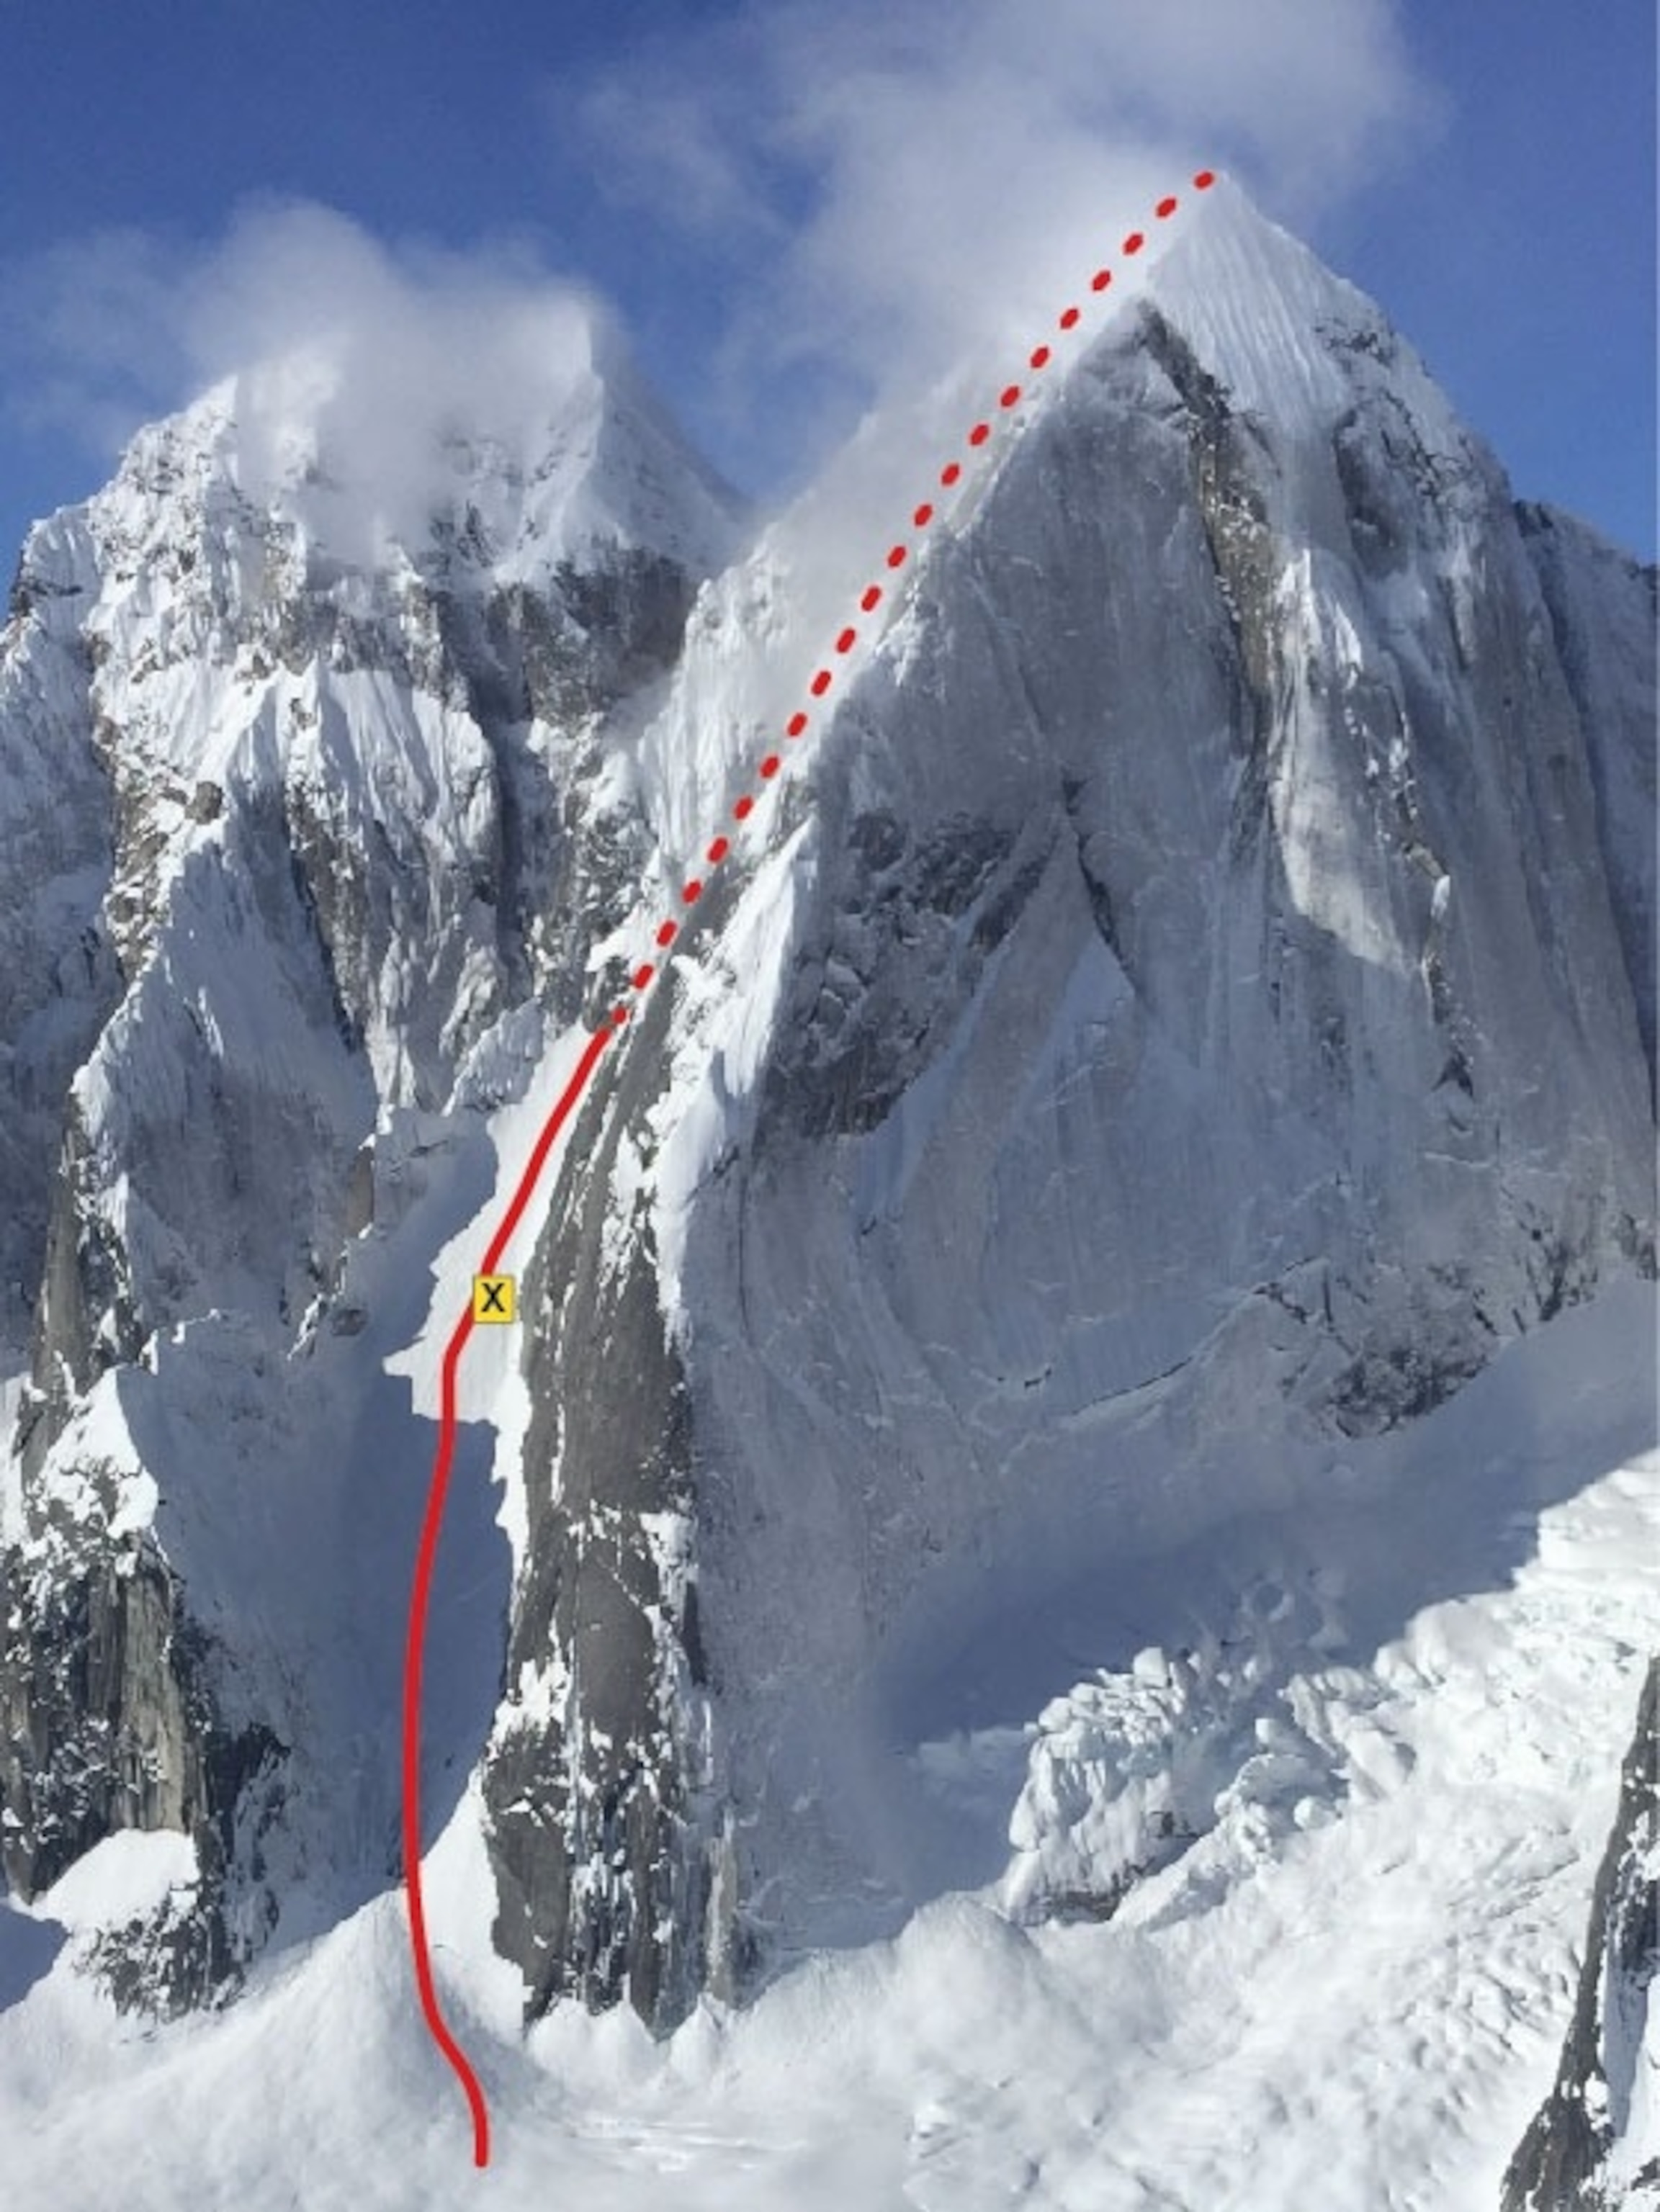 PHOTO: The "Escalator" route on Mt. Johnson, Denali National Park and Preserve. The X indicates the approximate location of the rescue of the surviving climbing partner.